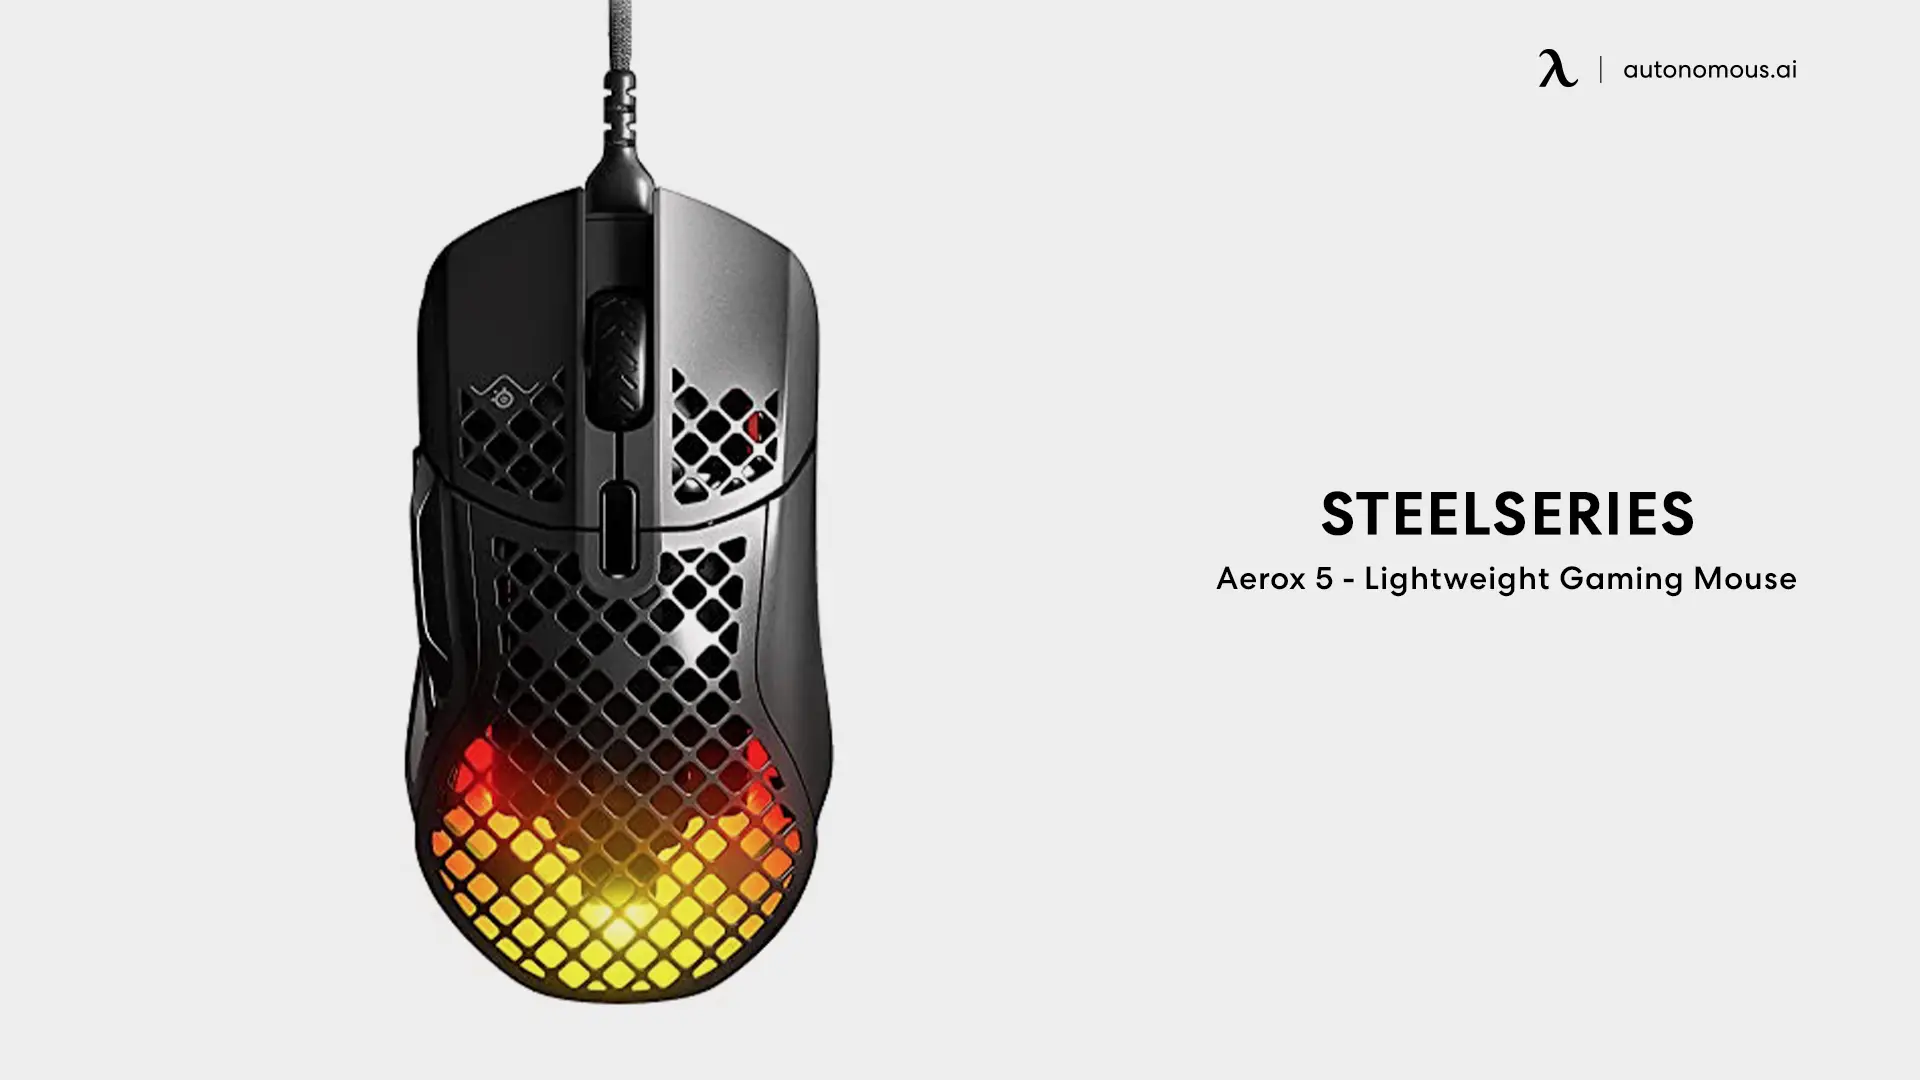 SteelSeries Aerox 5 - Lightweight Gaming Mouse